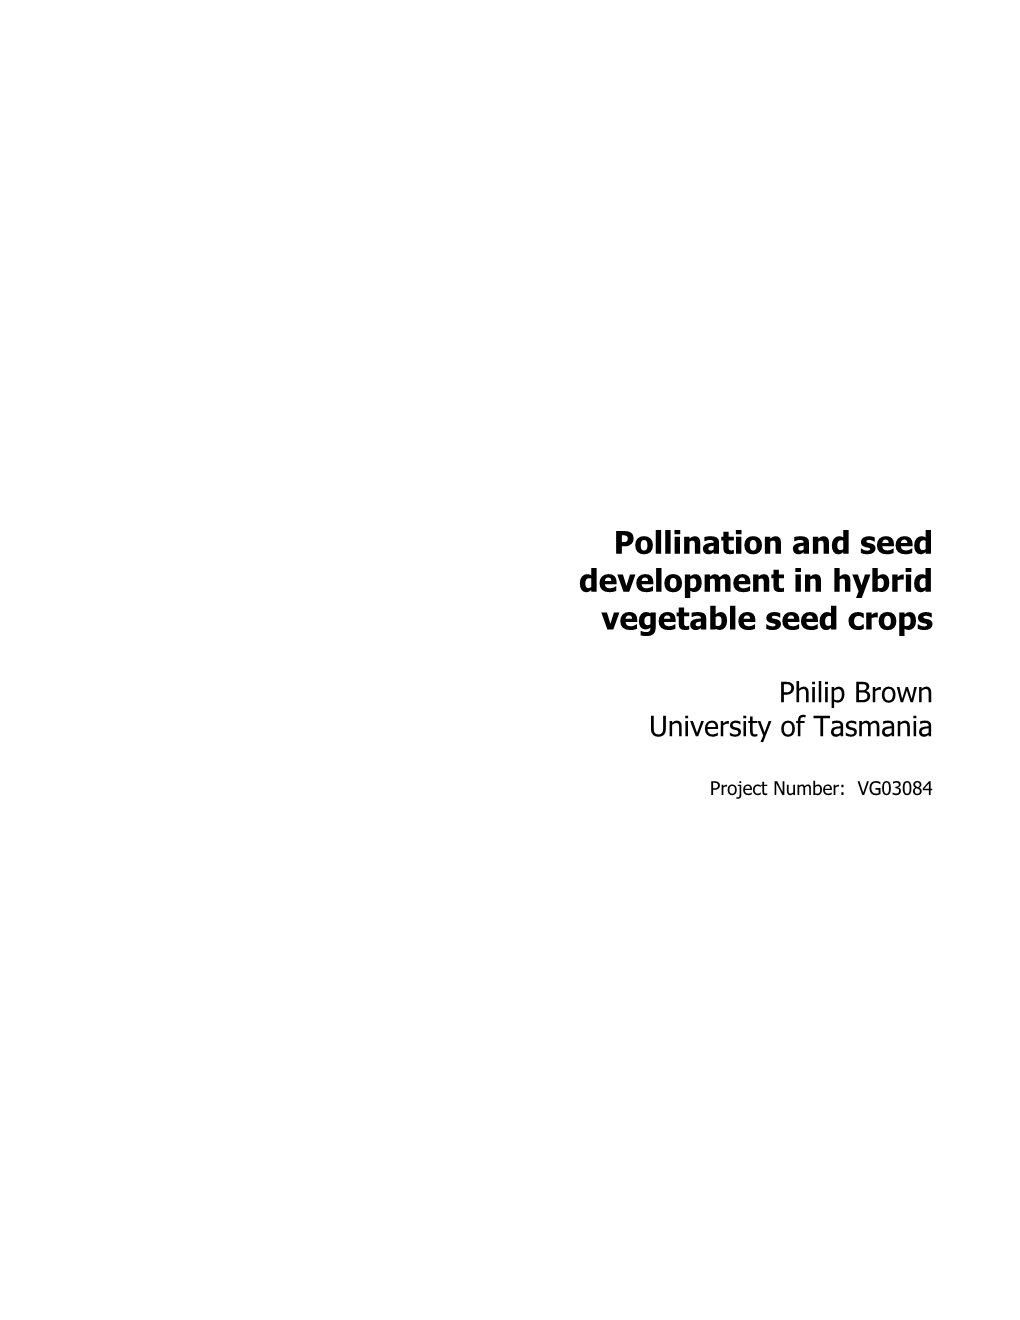 Pollination and Seed Development in Hybrid Vegetable Seed Crops